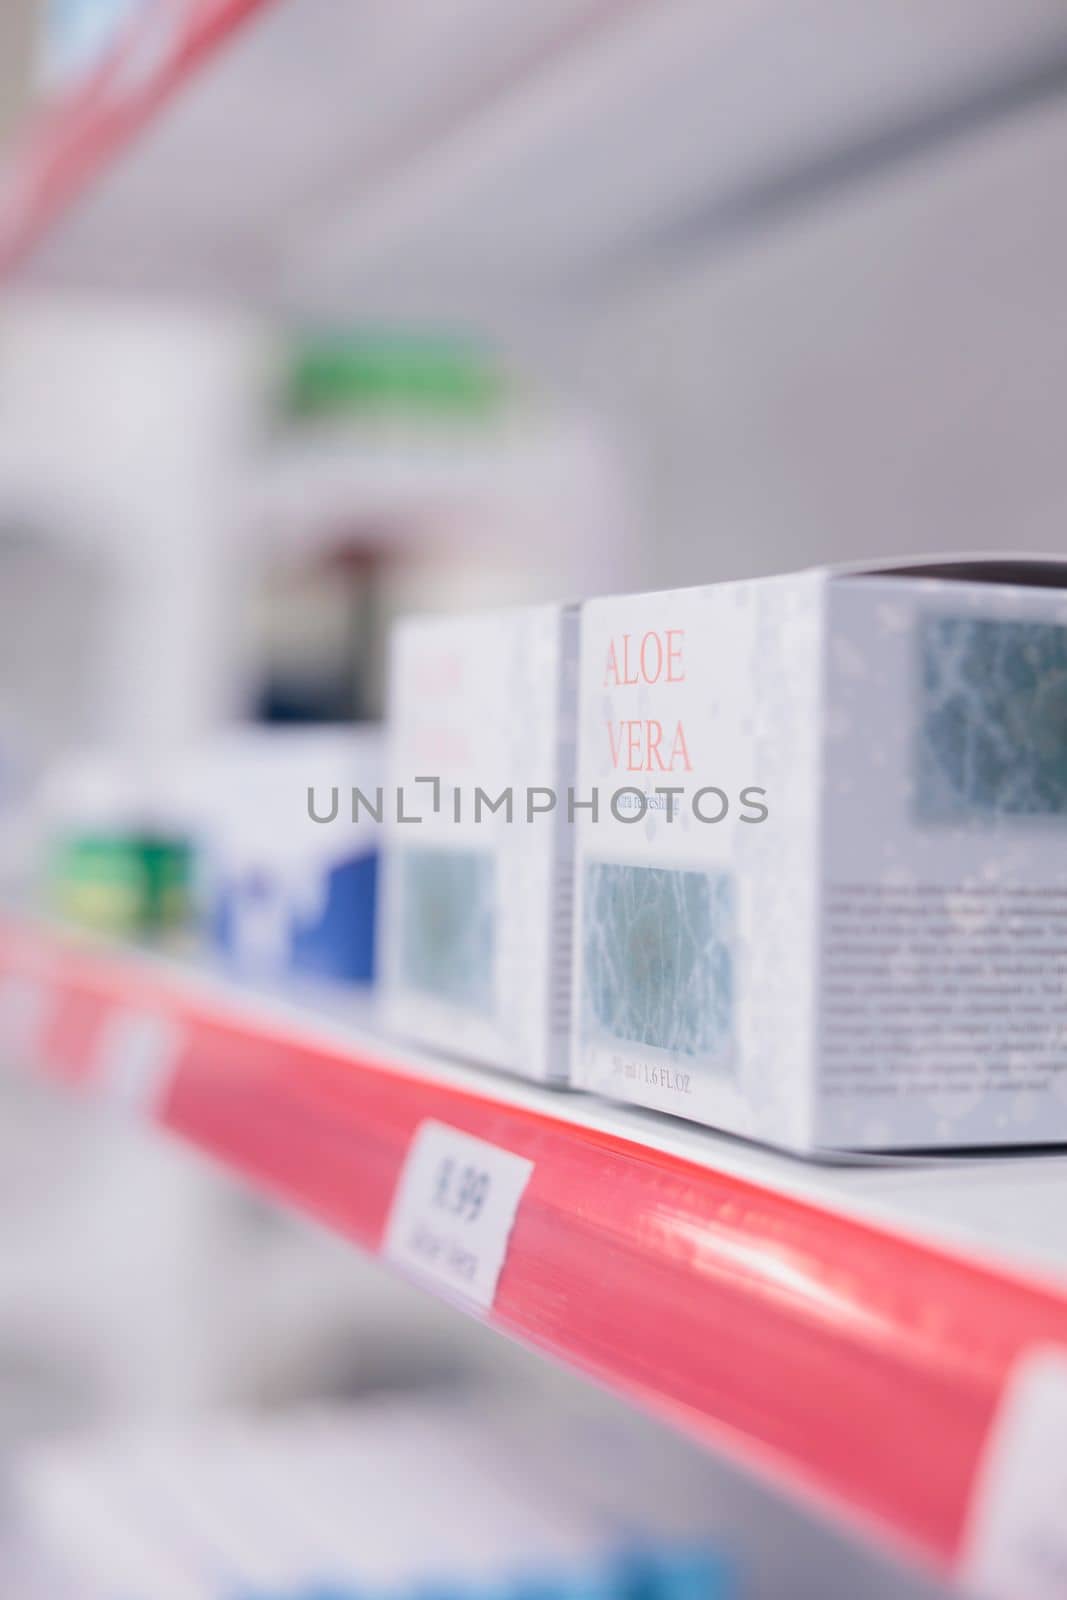 Drugstore shelves stocked with various medicinal products and aloe vera cream ready for clients by DCStudio